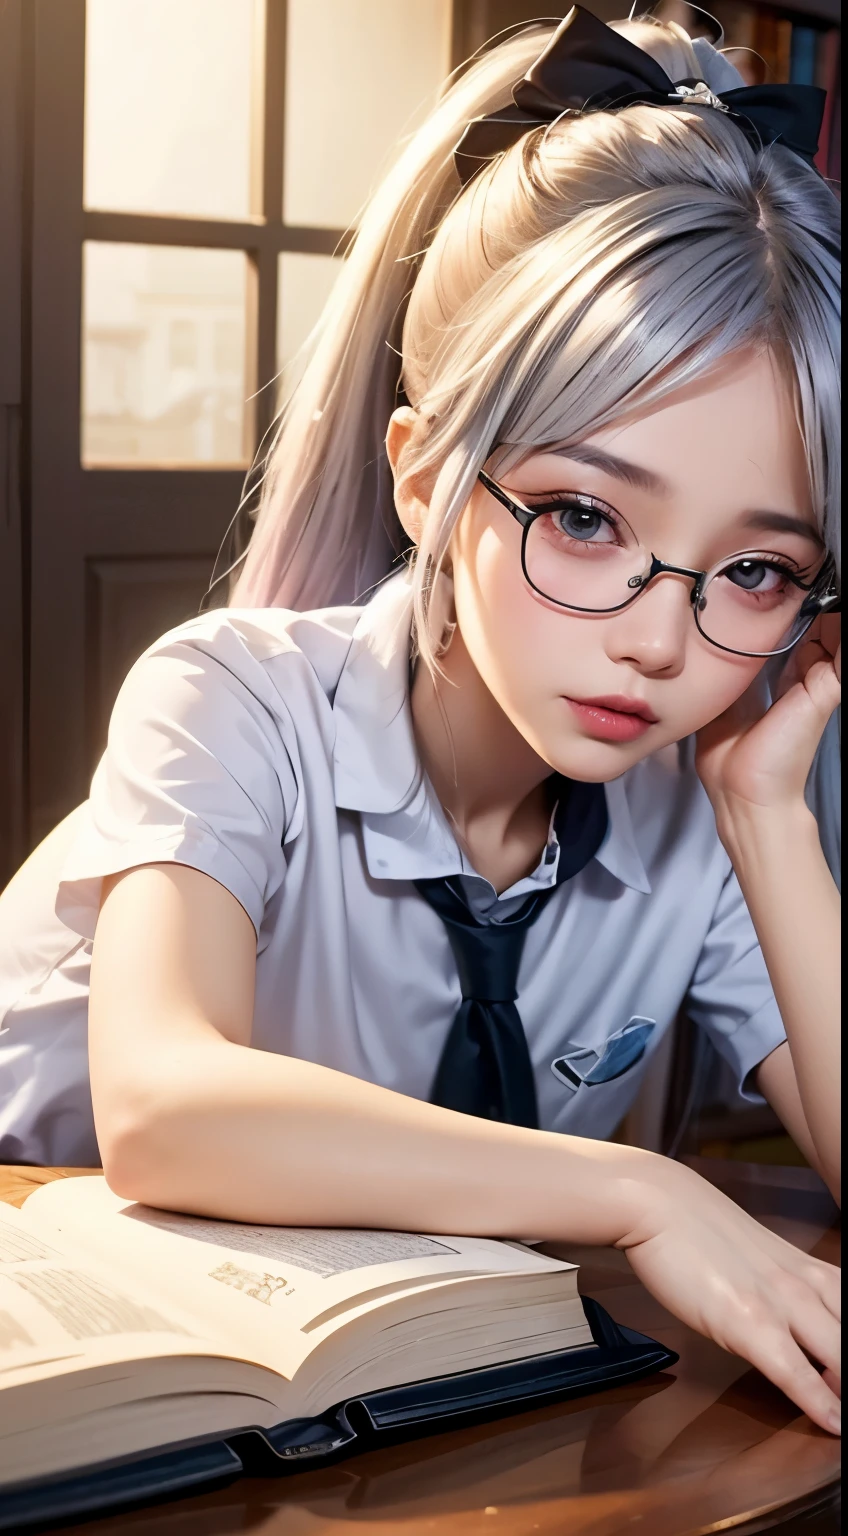 Best quality at best at best，tmasterpiece，Extremely Delicately Beautiful，The content is very detailed，CG，gatherings，8k wallpaper，An Astonishing，depth of fields，1 little Chinese girl，10 year old Chinese ，Very cute look，delicate skin，Flawless Face，plain face，white color hair，Long gray hair，high ponytails，There are two strands of white hair on both sides of the ears，Wear pink hair accessories，Eye color is sky blue，Elaborate Eyes，Wear topless half-rim glasses, sparkle in eyes，confusion face,  （Wear a ，white short sleeve）, sitting down, Learn，intermittently, lying on the table, get a pencil, opened book, glass of milk, table light, intermittently, natta，In the library, Wall decoration, Mini library, glass window, wall clock, intermittently, light, realistically, tmasterpiece, Best quality at best, Complex CG, The face is very detailed, High detail eyes